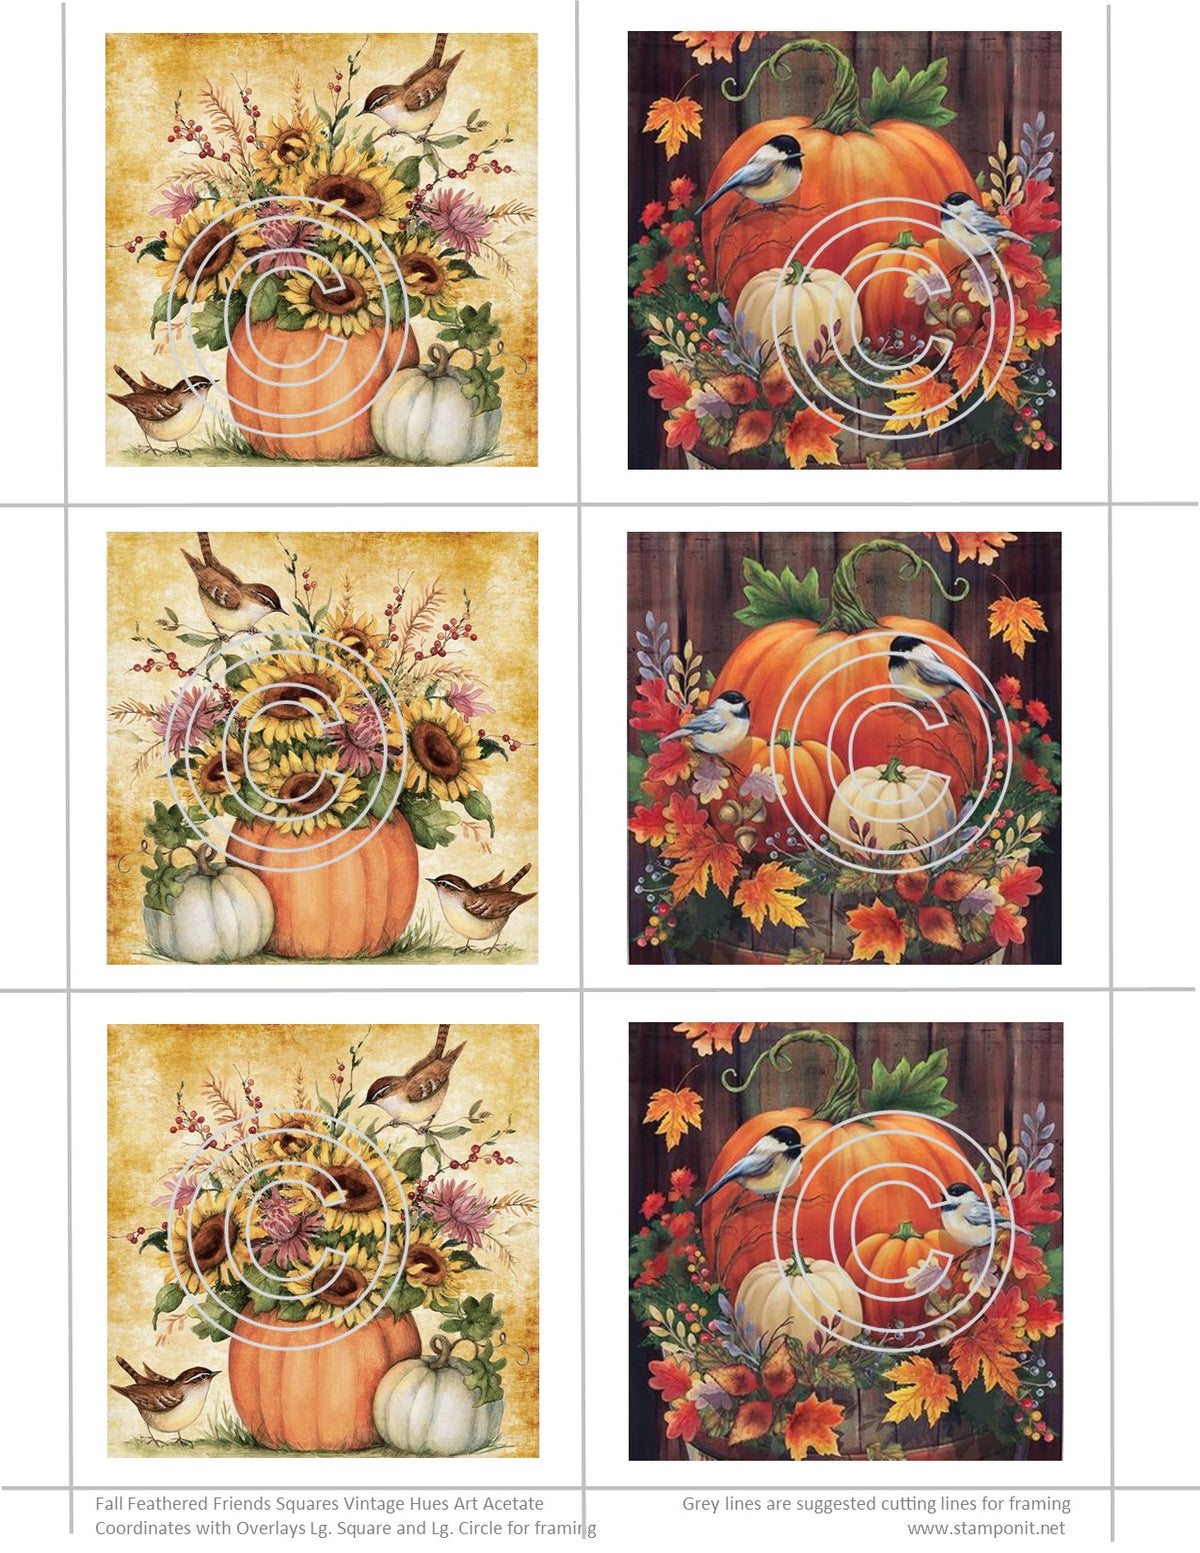 GlitterFilm & Vintage Hues 12 Card Kit Fall Feathered Friends